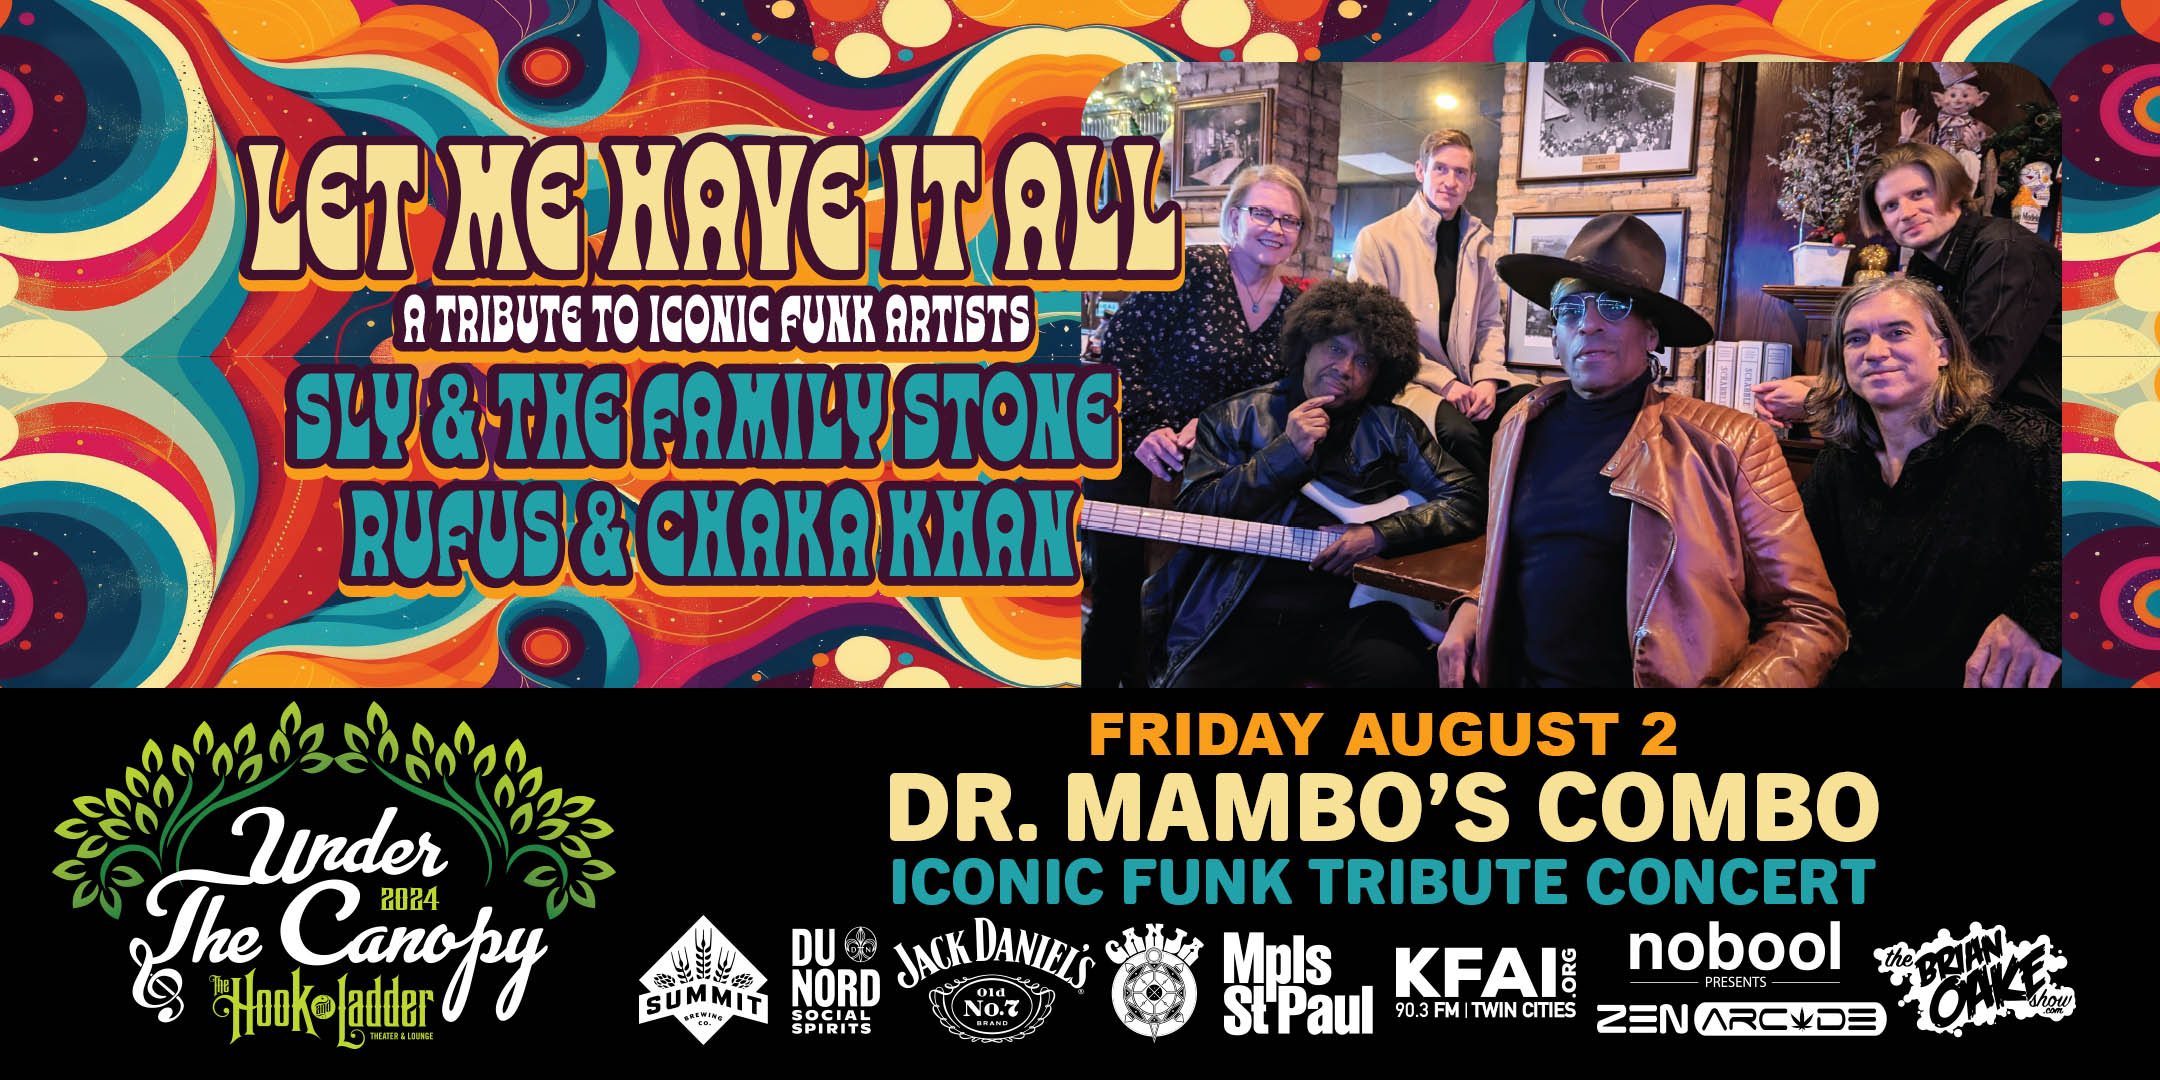 LET ME HAVE IT ALL Dr. Mambo's Combo Presents A Tribute to Iconic Funk Artists Sly and The Family Stone / Chaka Kahn & Rufus Friday, August 2 Under The Canopy at The Hook and Ladder Theater "An Urban Outdoor Summer Concert Series" Doors 6:00pm :: Music 7:00pm :: 21+ Reserved Seats: $30 GA: $20 ADV / $25 DOS